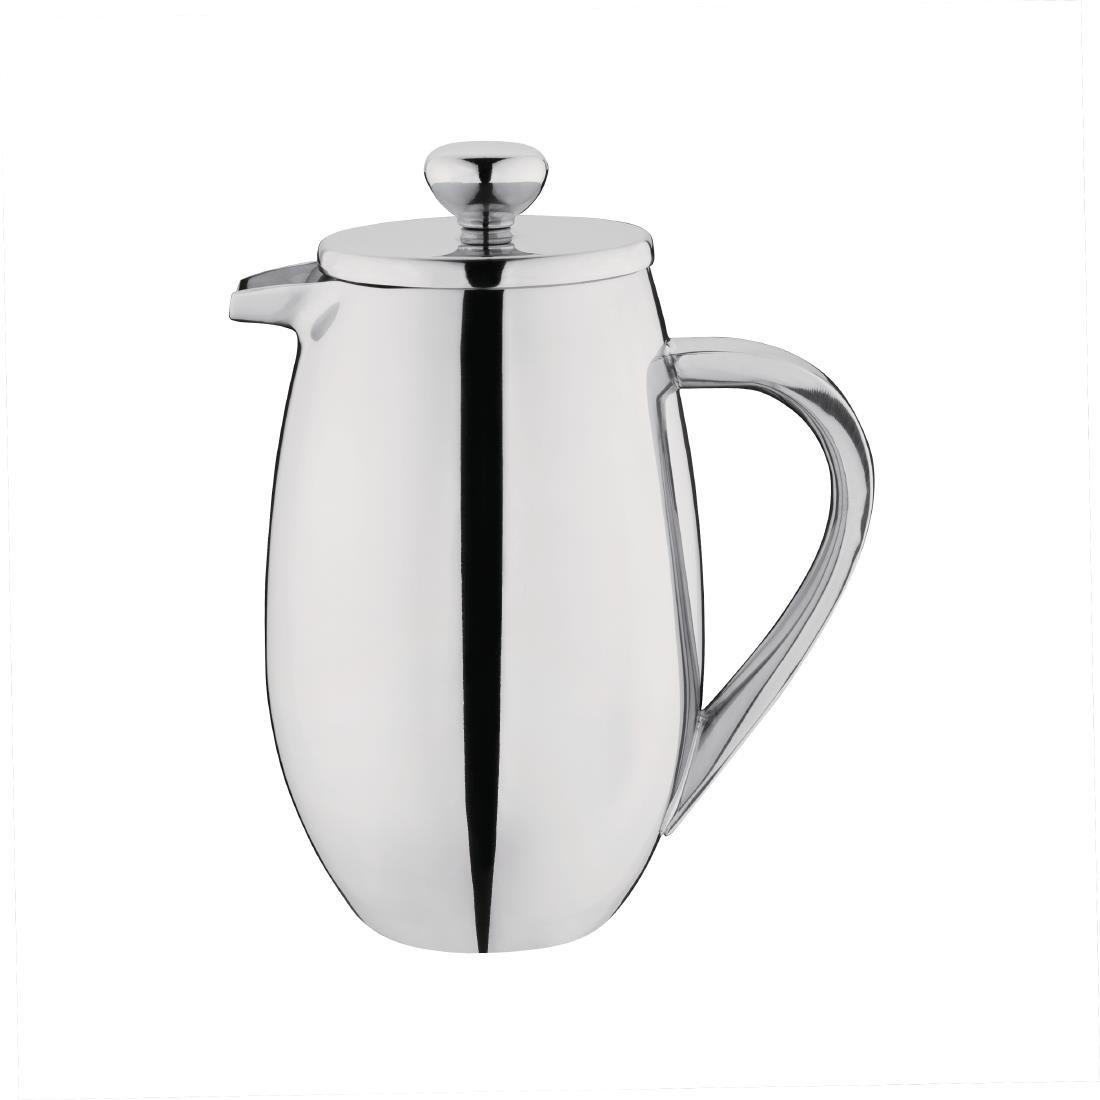 W836 - Stainless Steel Cafetiere